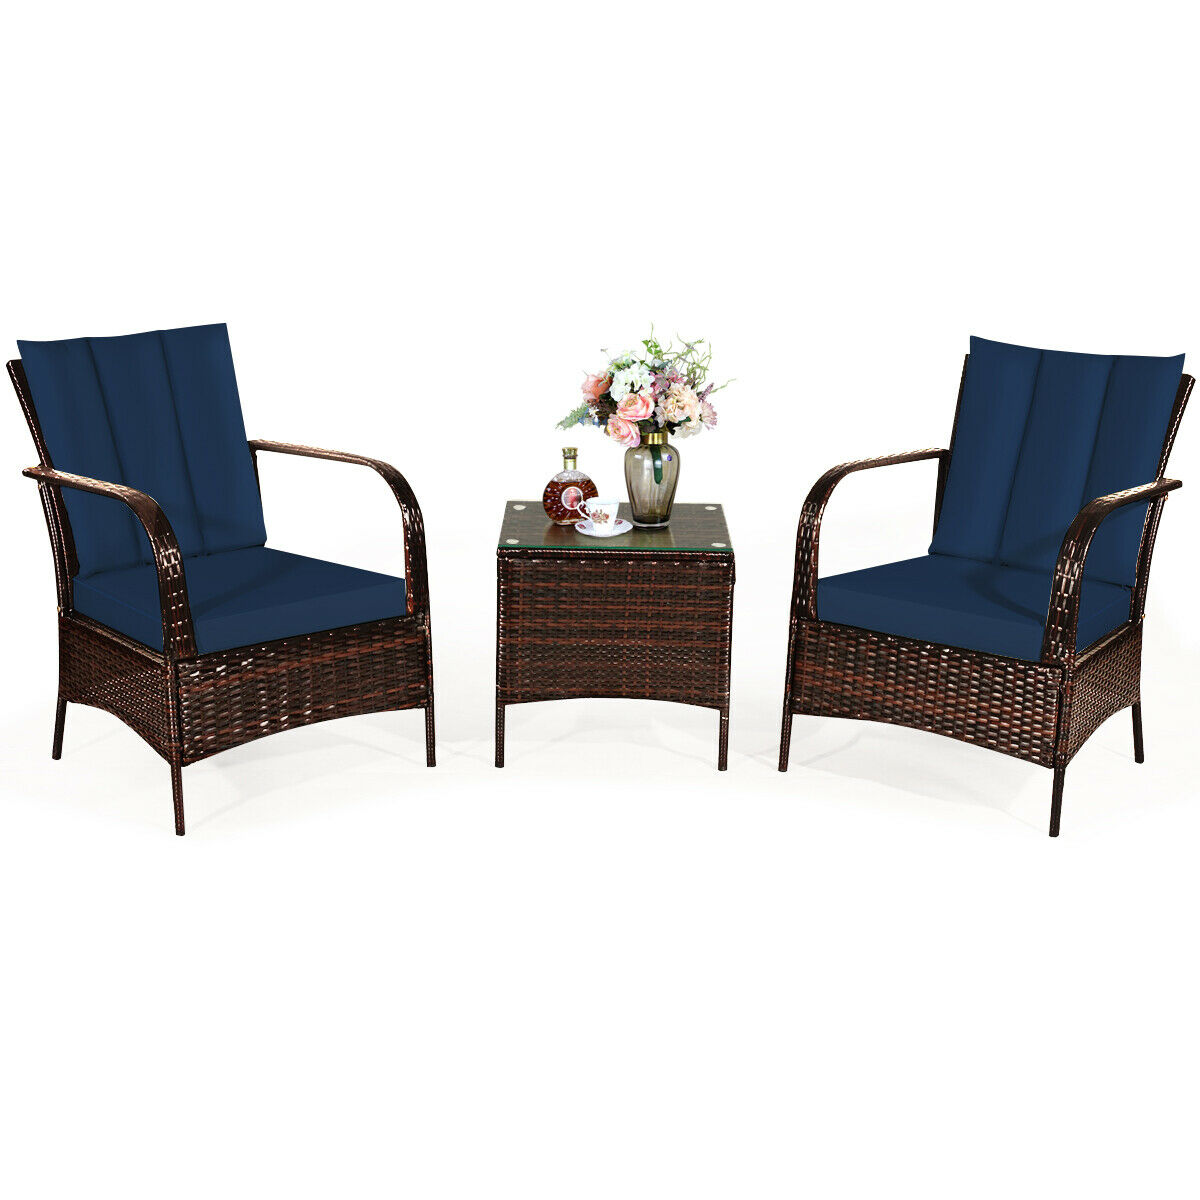 3 PCS Patio Rattan Furniture Set Coffee Table & 2 Rattan Chair with Cushions HW65850